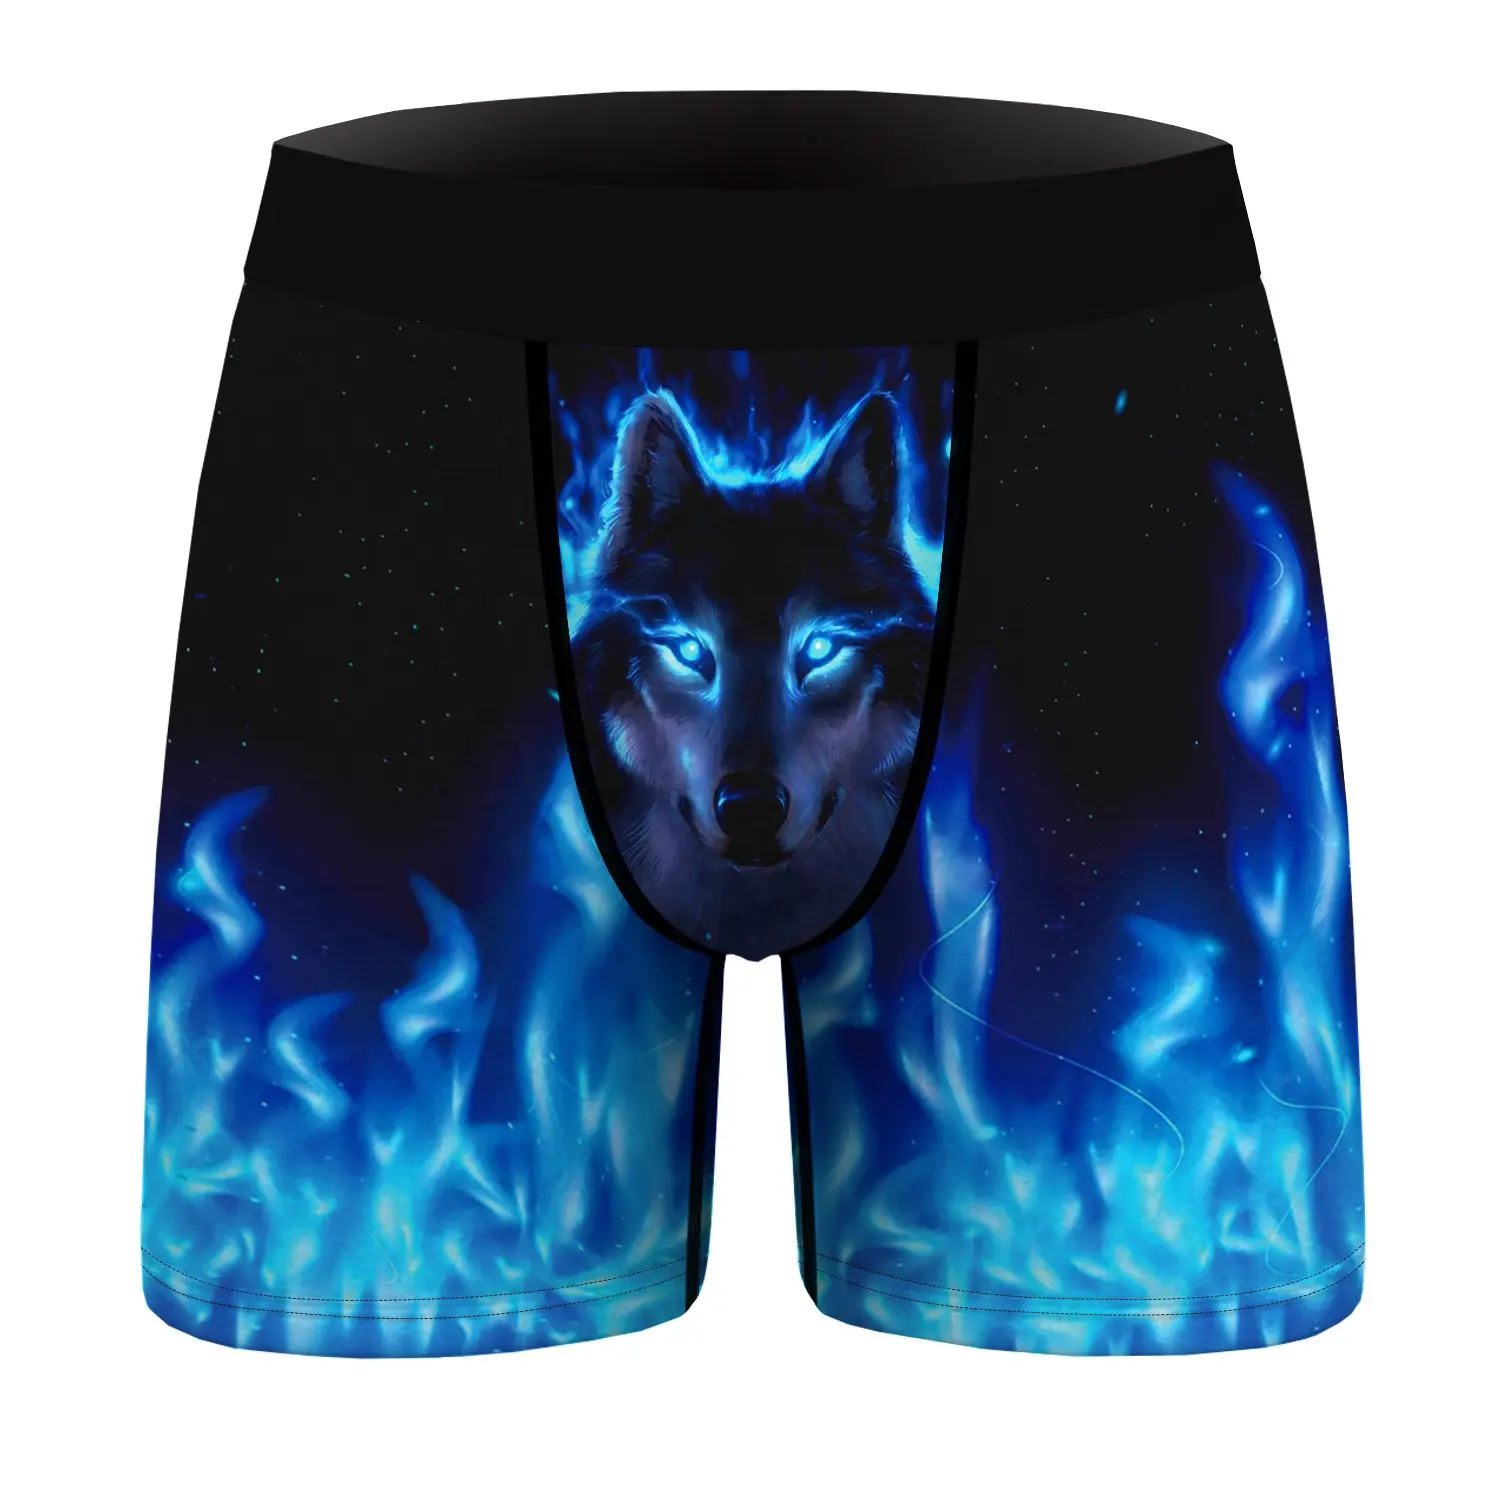 New Popular Digital Printing Men's Underwear Boxer Briefs Mid-waist Stretchable Breathable Shorts Men's Boxers